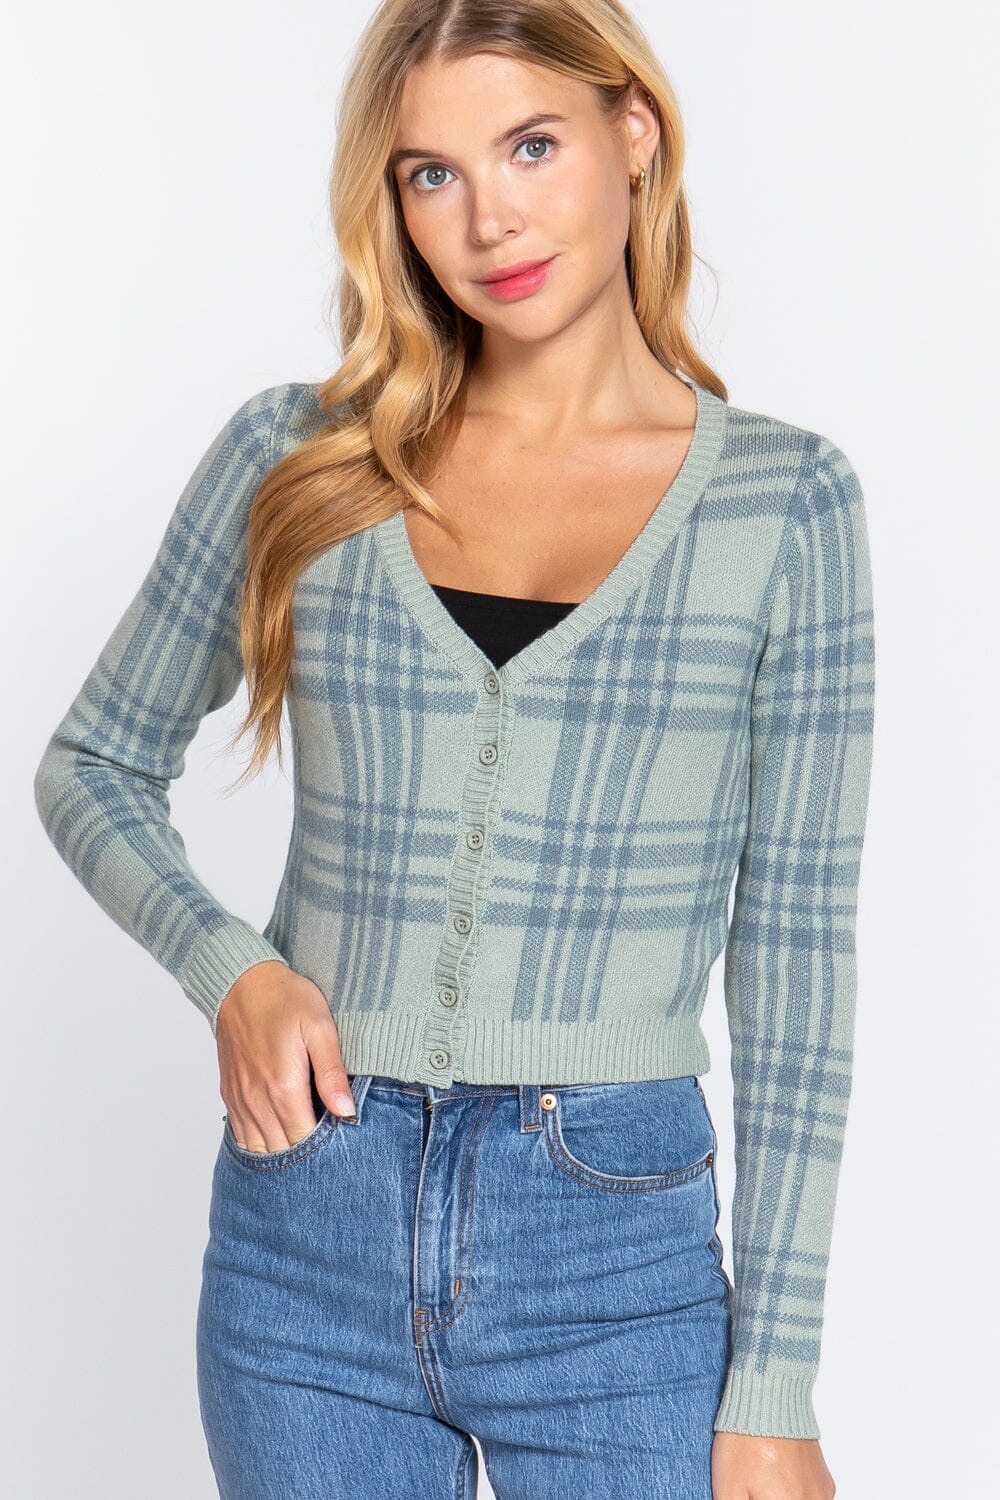 Dusty Sage Green Long Sleeve V neck Fitted Button Down Plaid Sweater Cardigan jehouze 